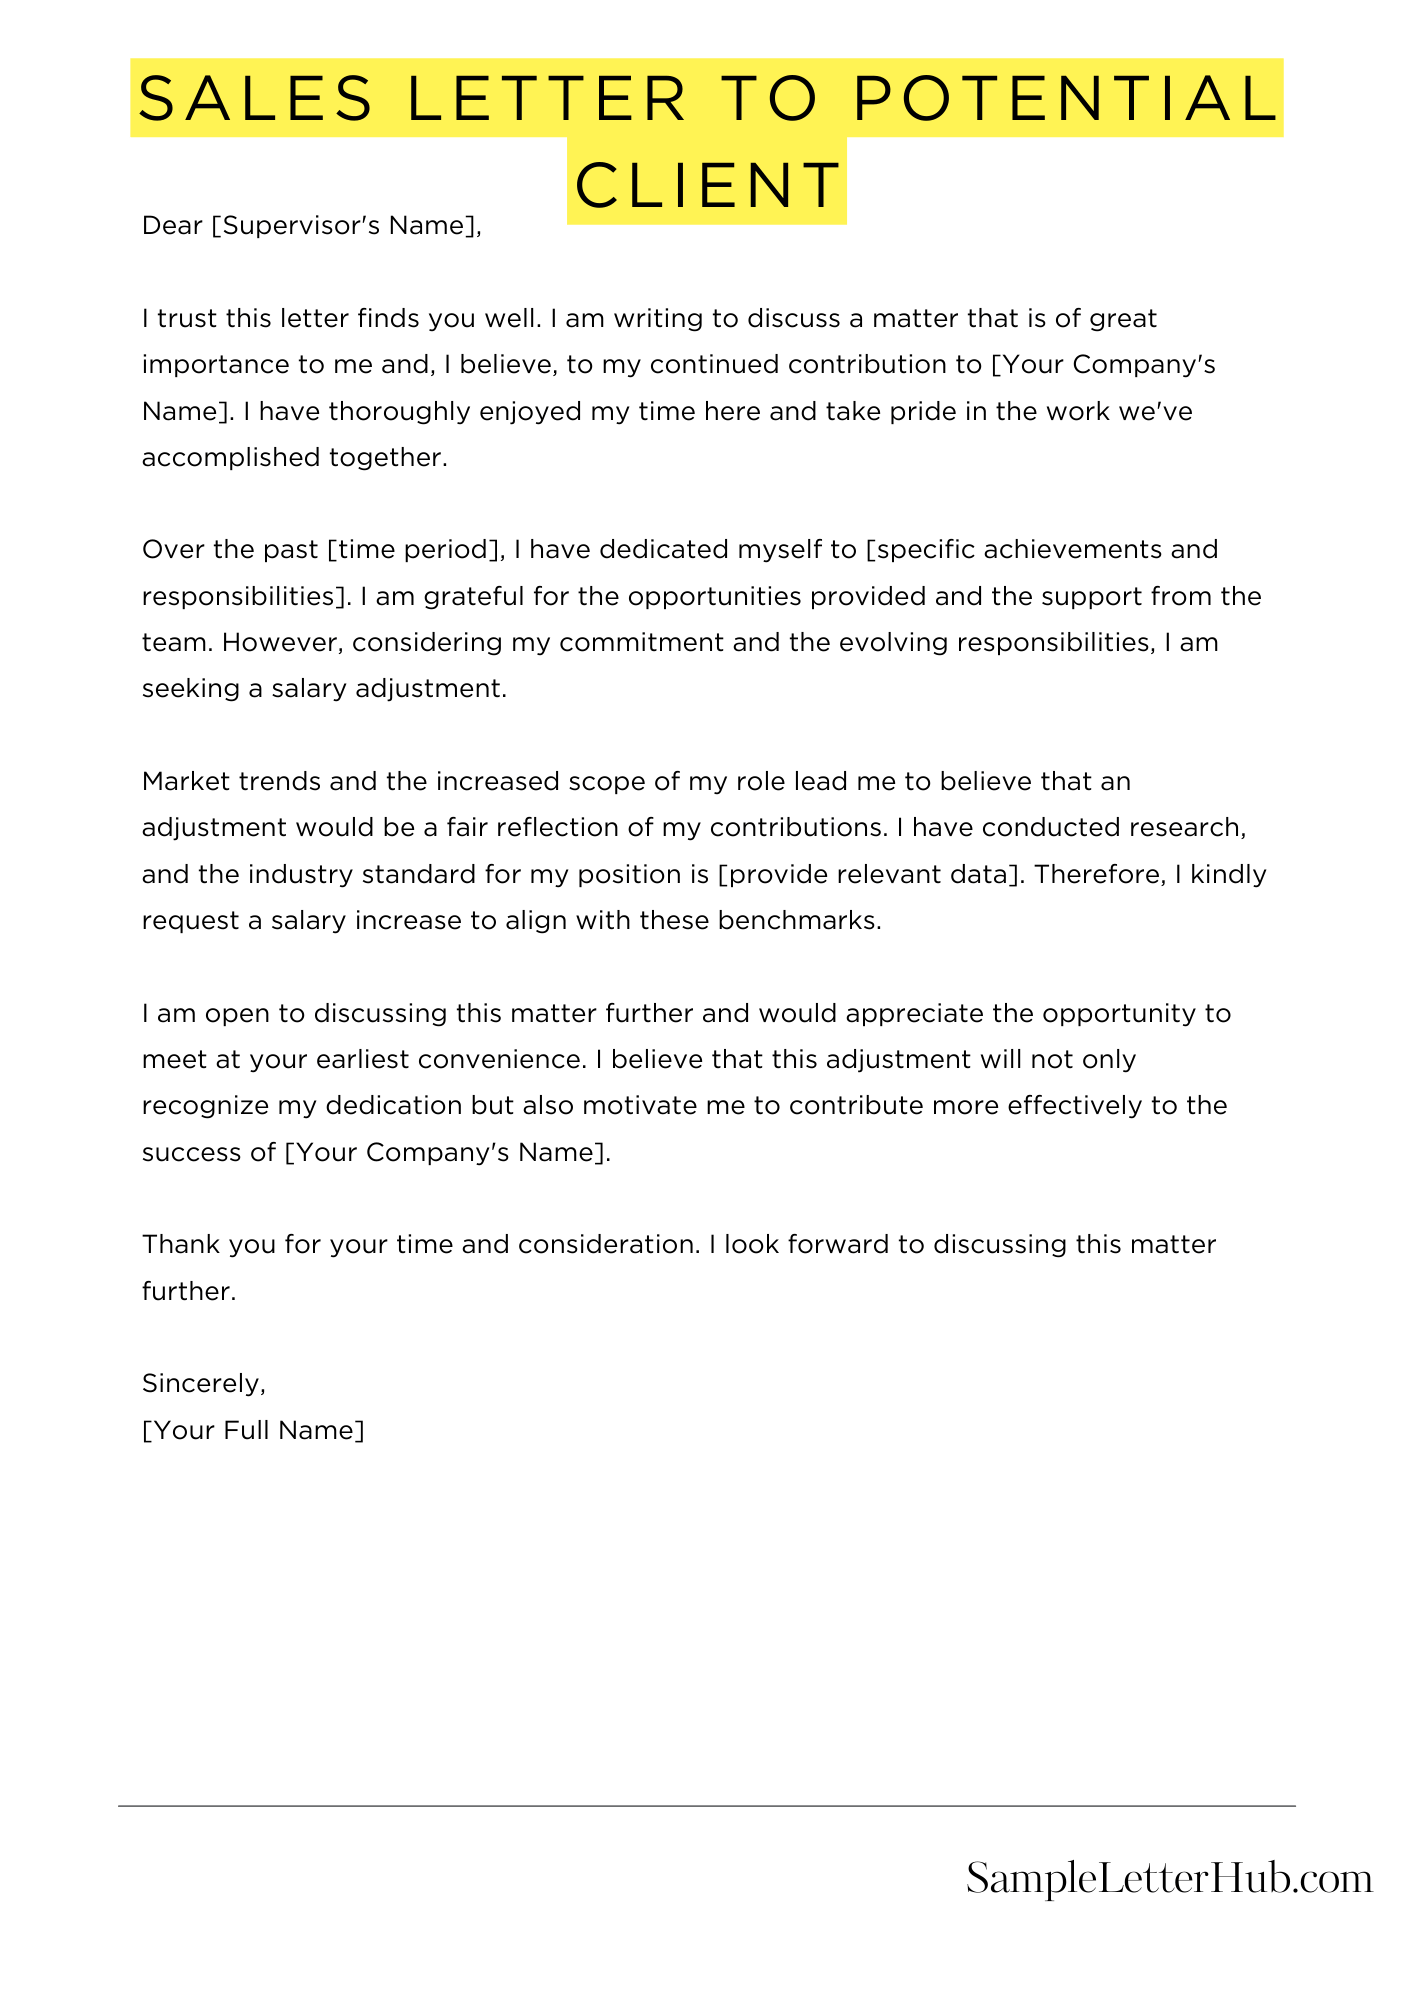 Sales Letter To Potential Client